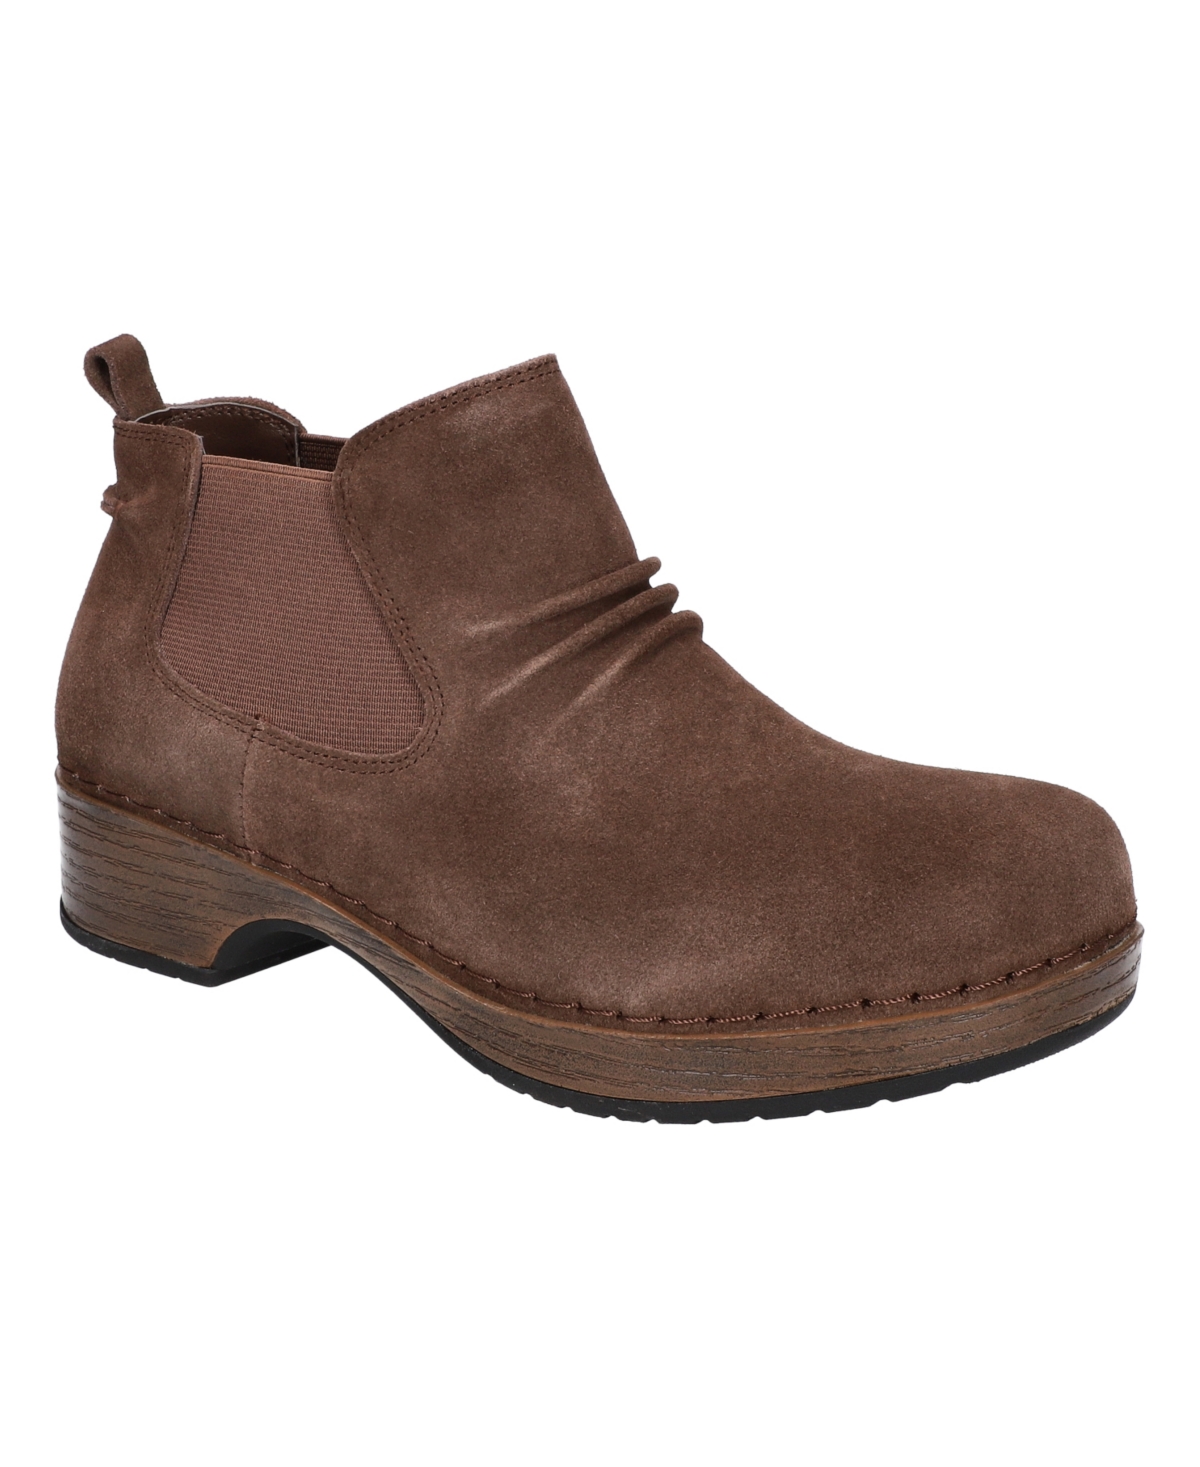 Women's Sure thing Slip Resistant Chelsea Boots - Brown Suede Leather